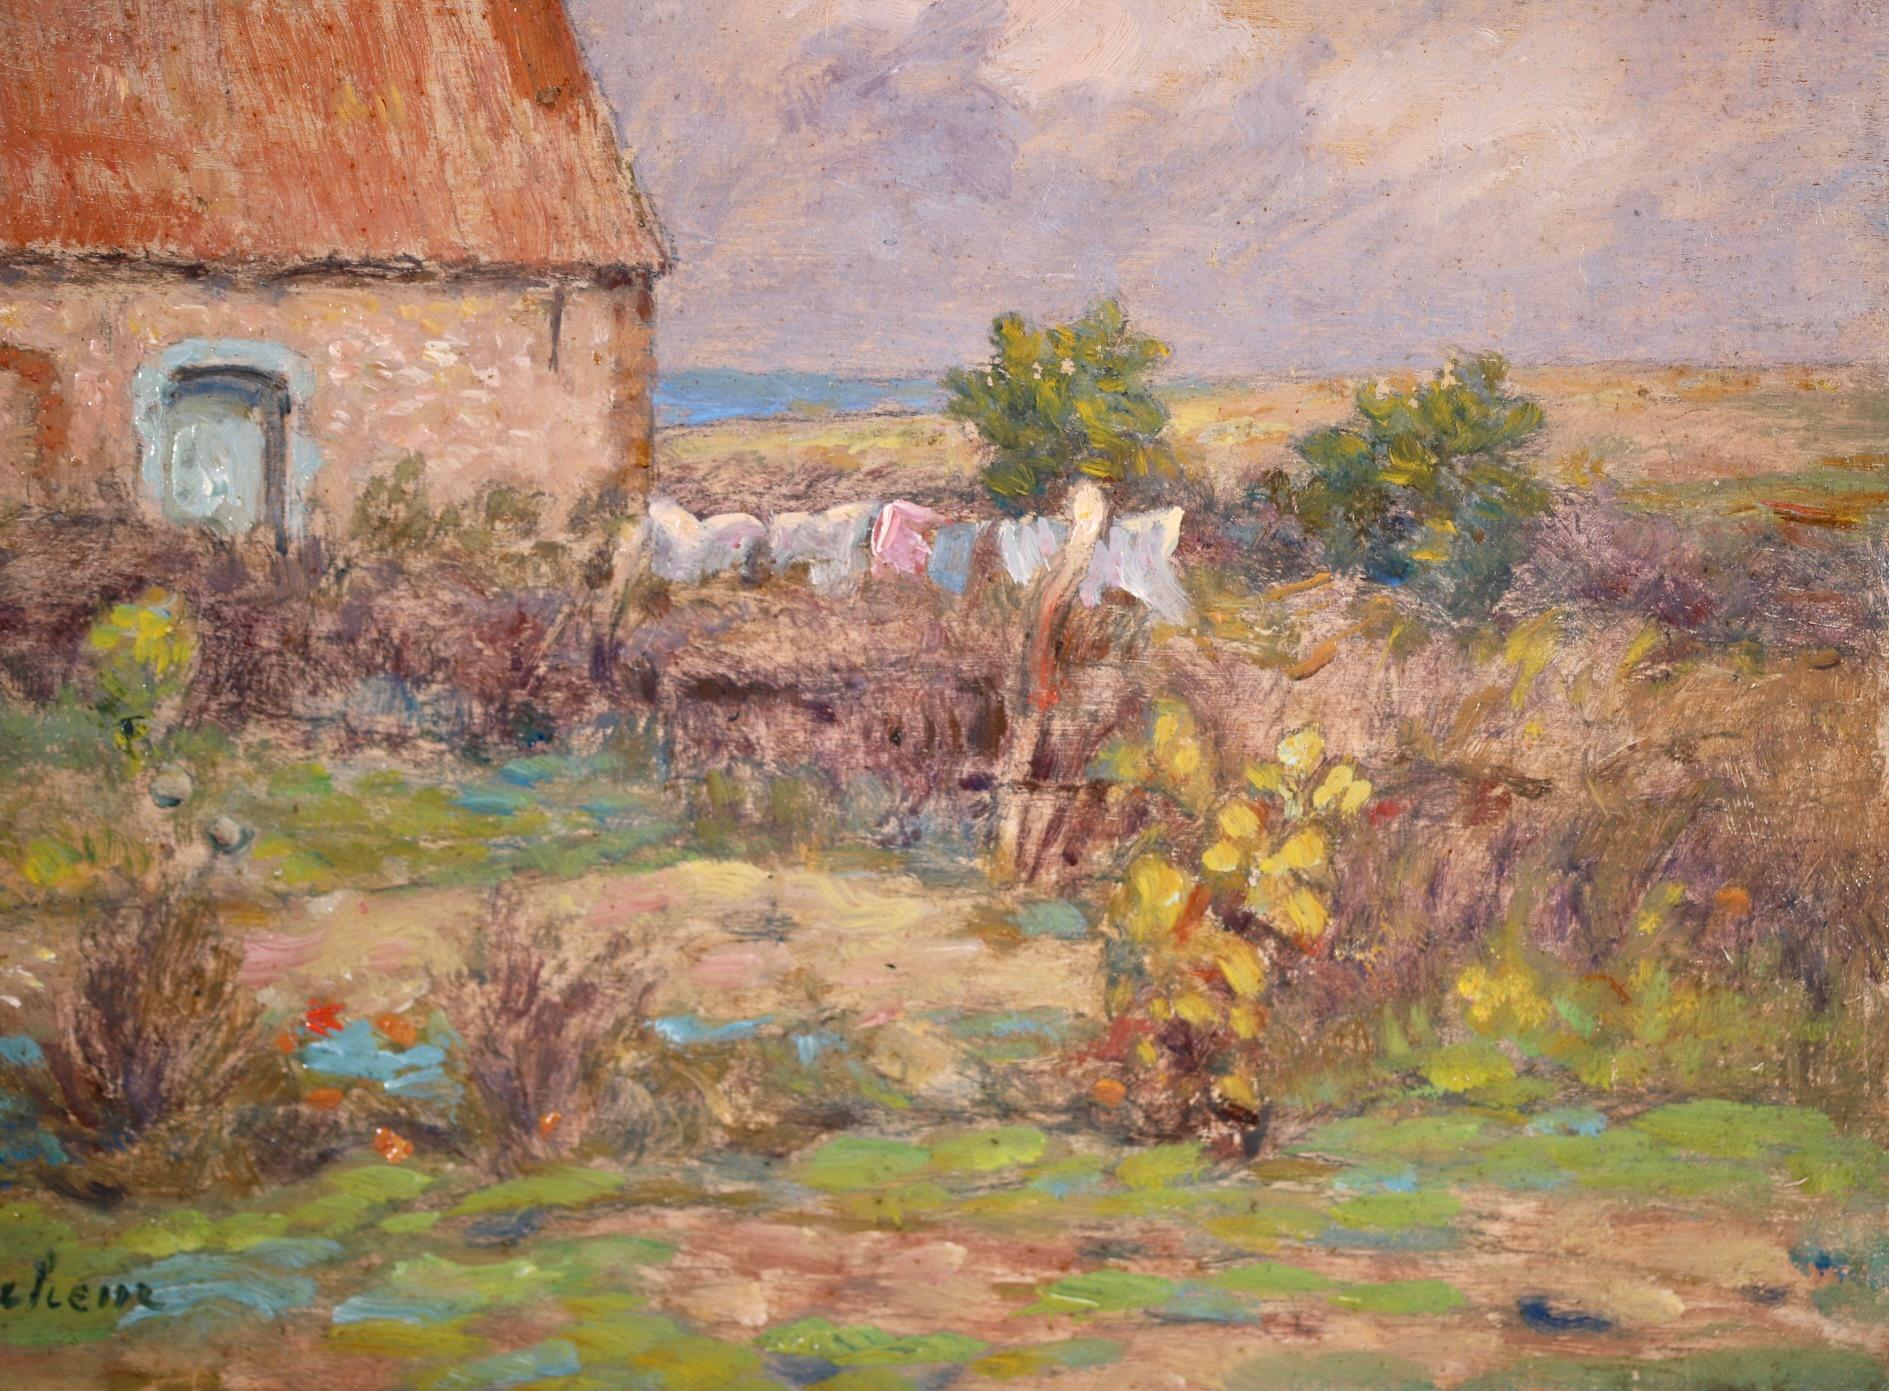 Drying Washing - French Impressionist Oil, Cottage in Landscape by Marie Duhem 5